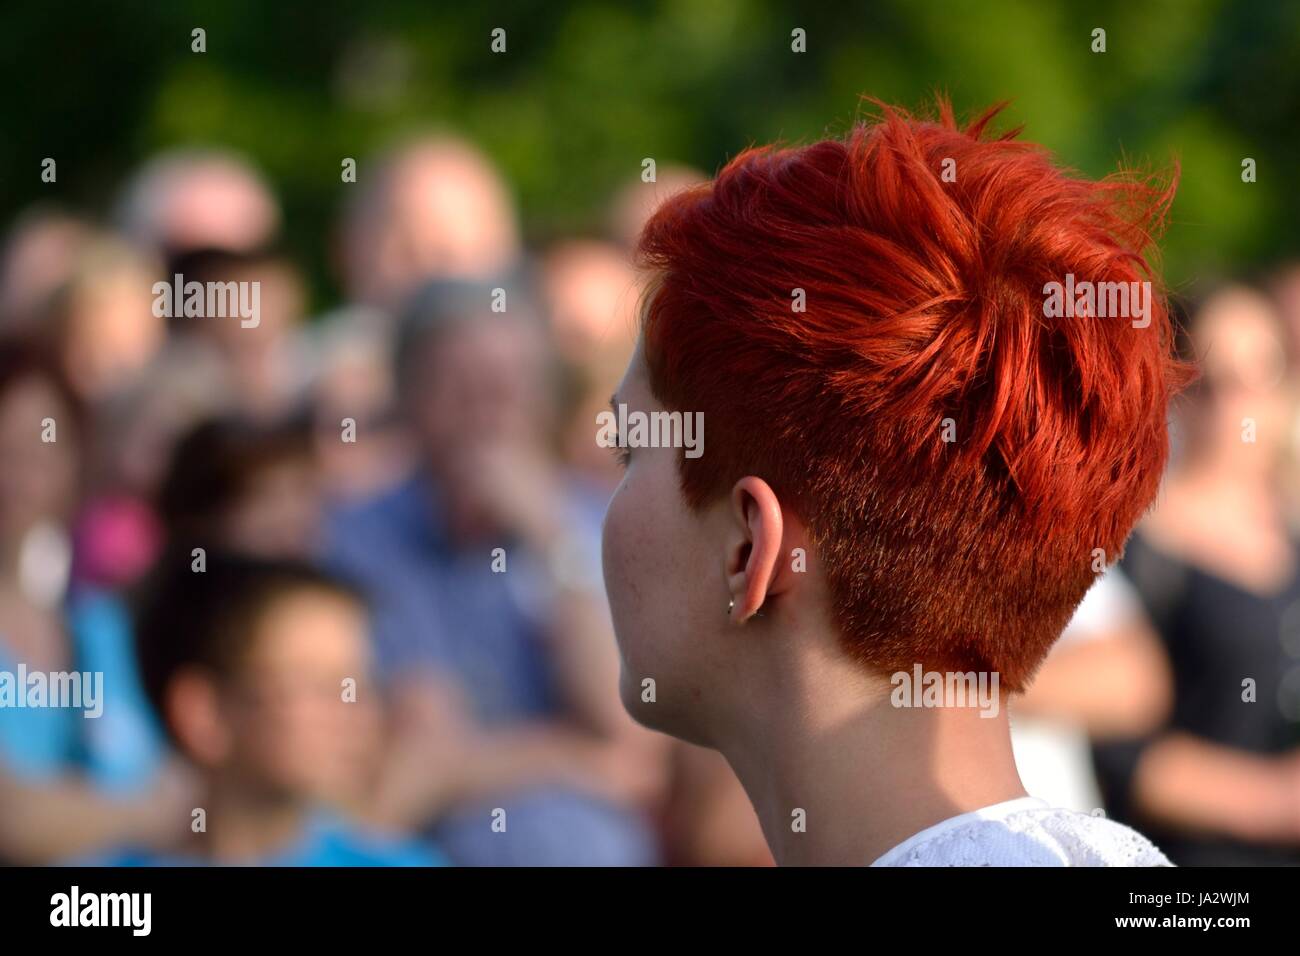 hairs, hairdo, teenager, colour of hair, dyer, staint, pigment, hairs,  hairdo Stock Photo - Alamy